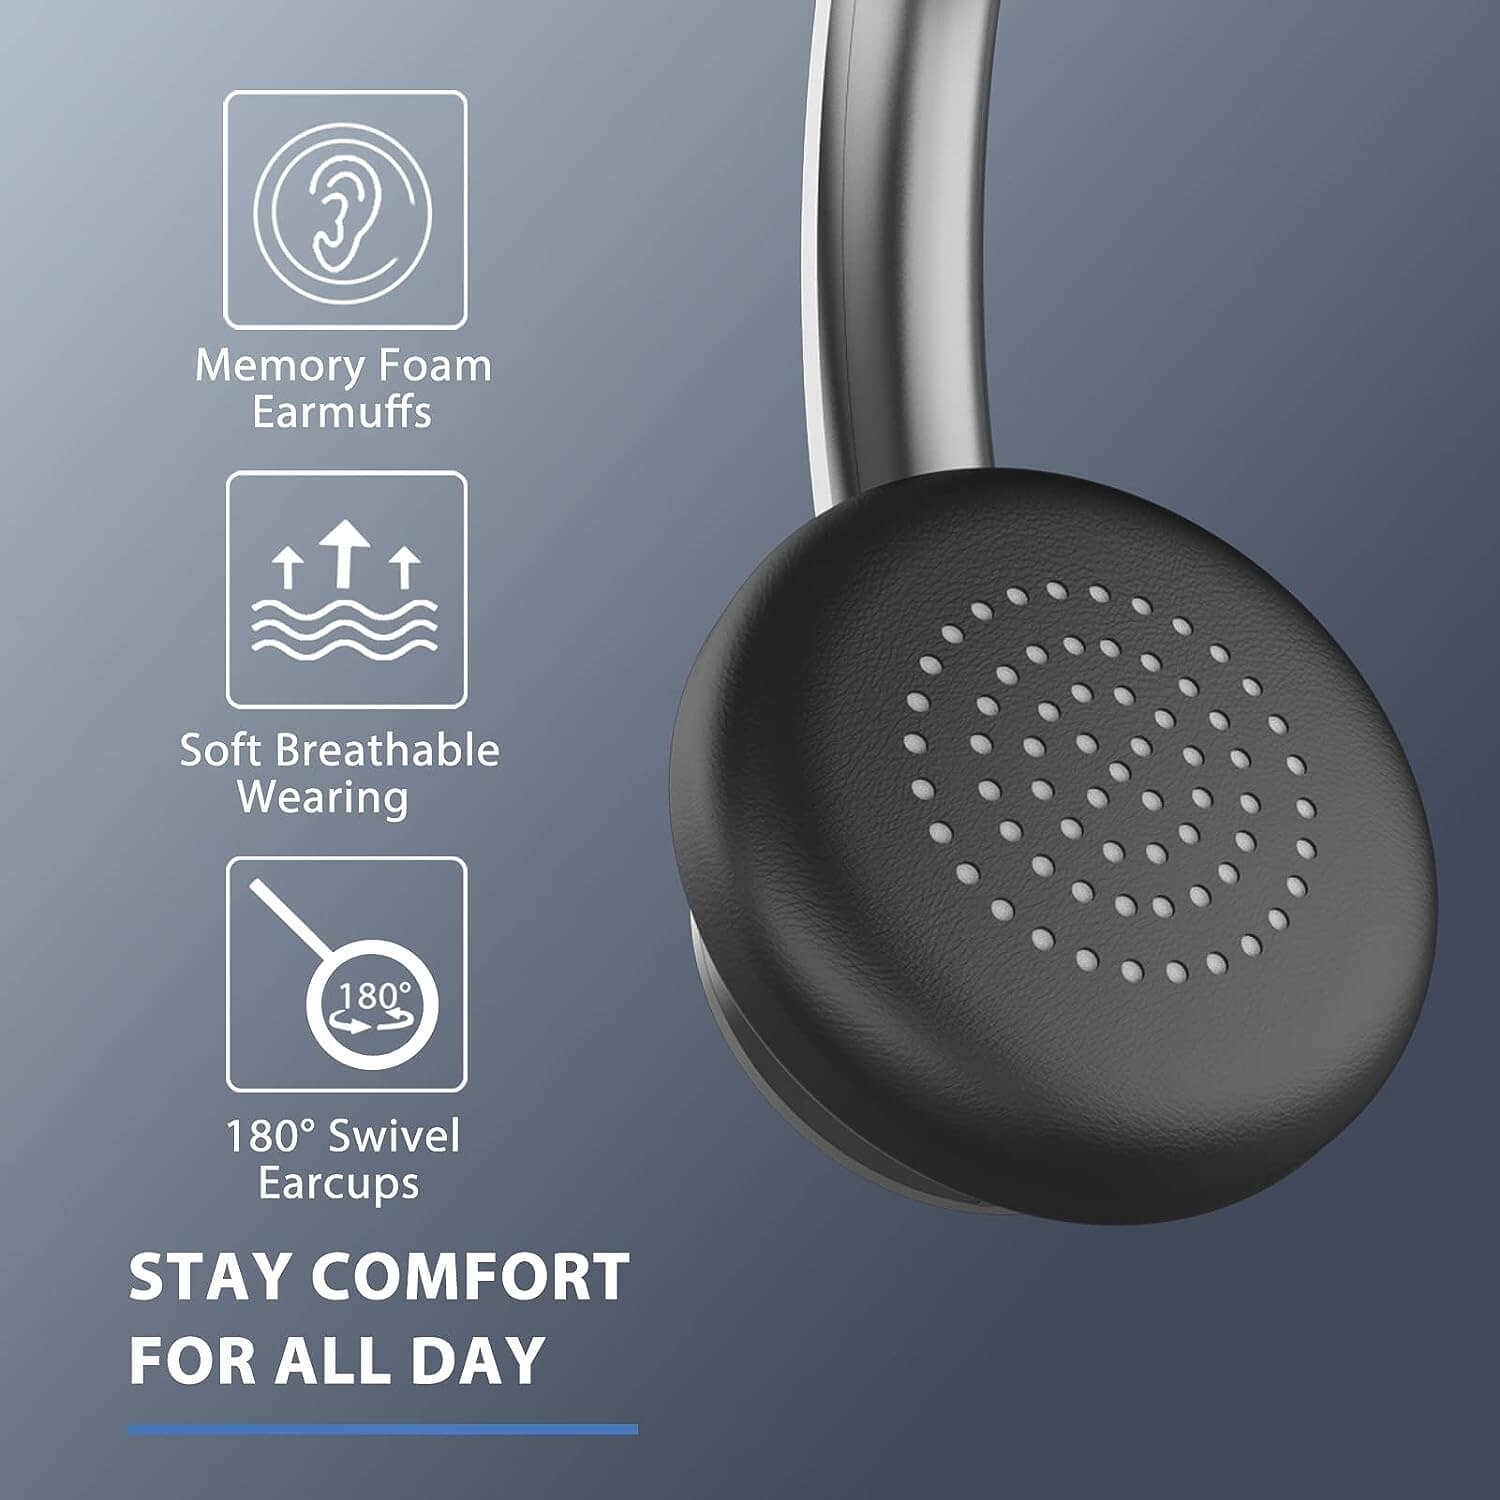 Memory foam earmuffs,Soft breathable wearing,180° swivel earcups,Stay comfort for all day.